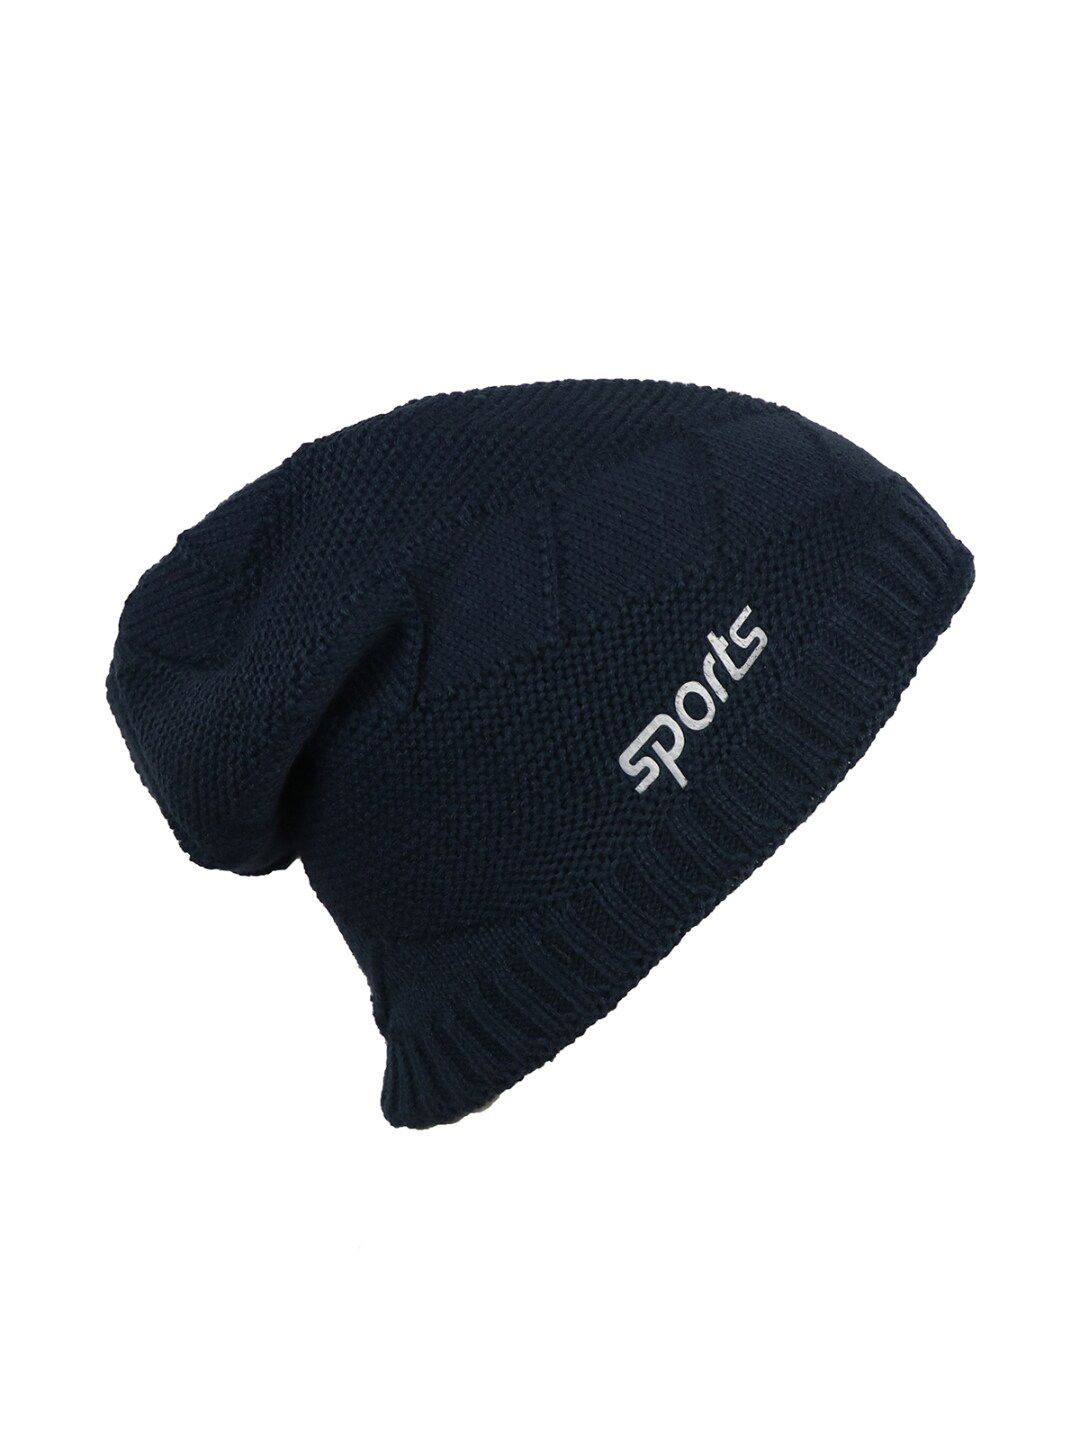 iSWEVEN Unisex Navy Blue Wool Beanie Price in India